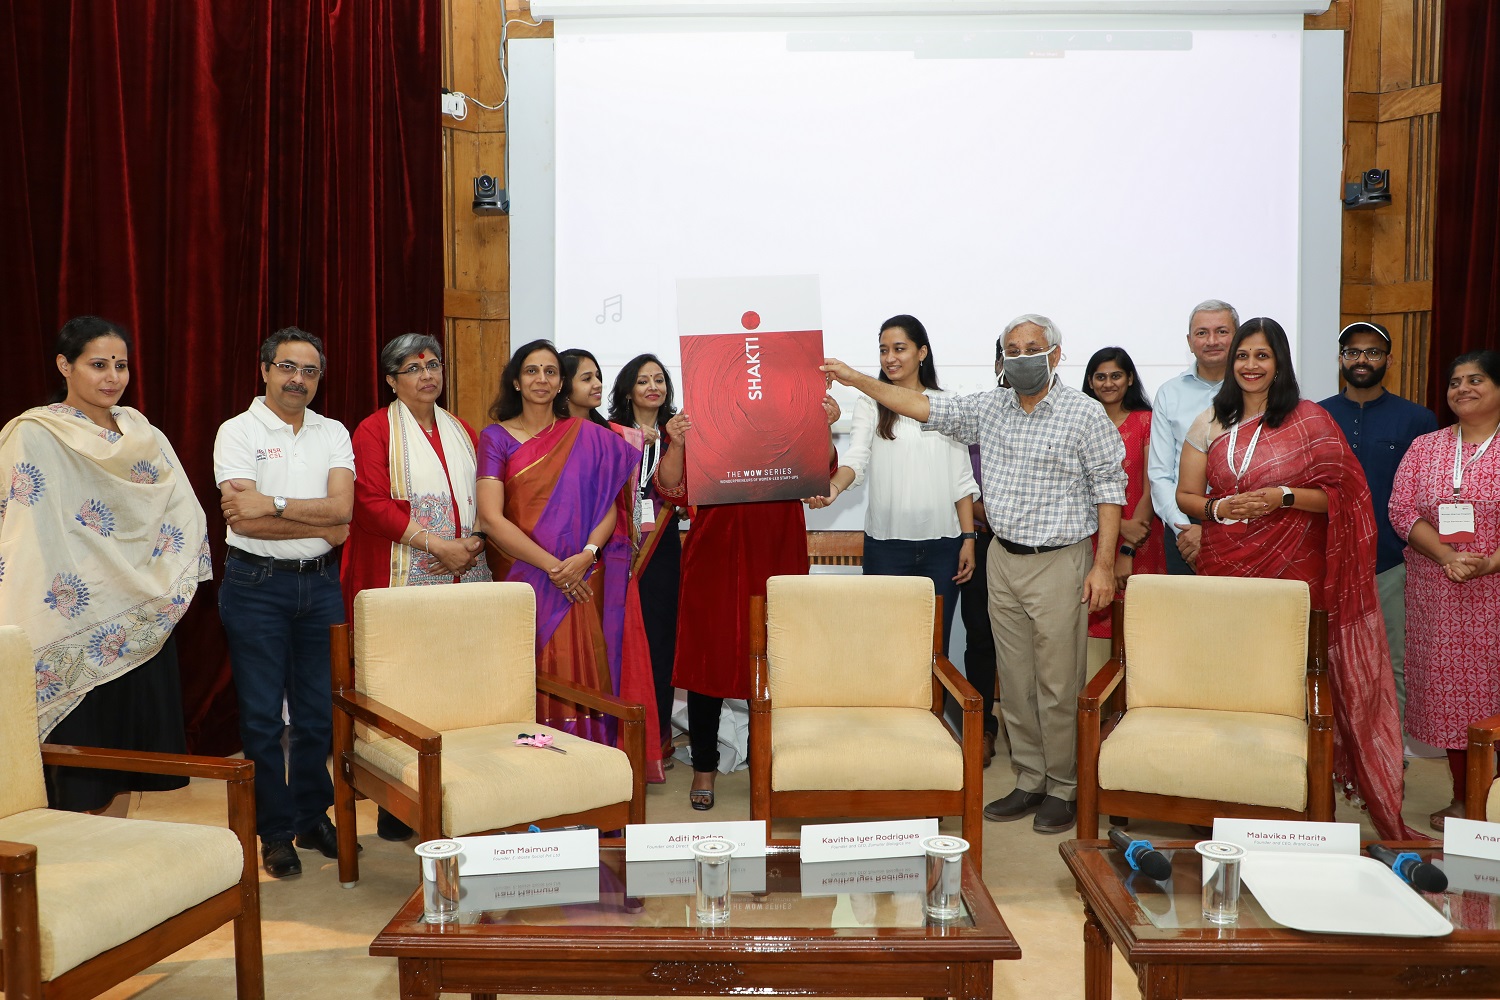 Kavitha Iyer Rodrigues, Founder and CEO, Zumutor Biologics Inc, Anand Sri Ganesh, COO, NSRCEL, IIMB, Malavika R Harita, Member of the Board of Governors at IIMB, Prof. Srivardhini K Jha, Chairperson, NSRCEL, Ankita Pegu, Program Head, Women Startup Program, NSRCEL, IIMB, Prof. Suresh Bhagavatula, faculty in the Entrepreneurship area at IIMB launch SHAKTI – an e-book which is a collection of stories of entrepreneurial pursuits, marked by challenges, sacrifices, losses, gains, learnings and triumphs.